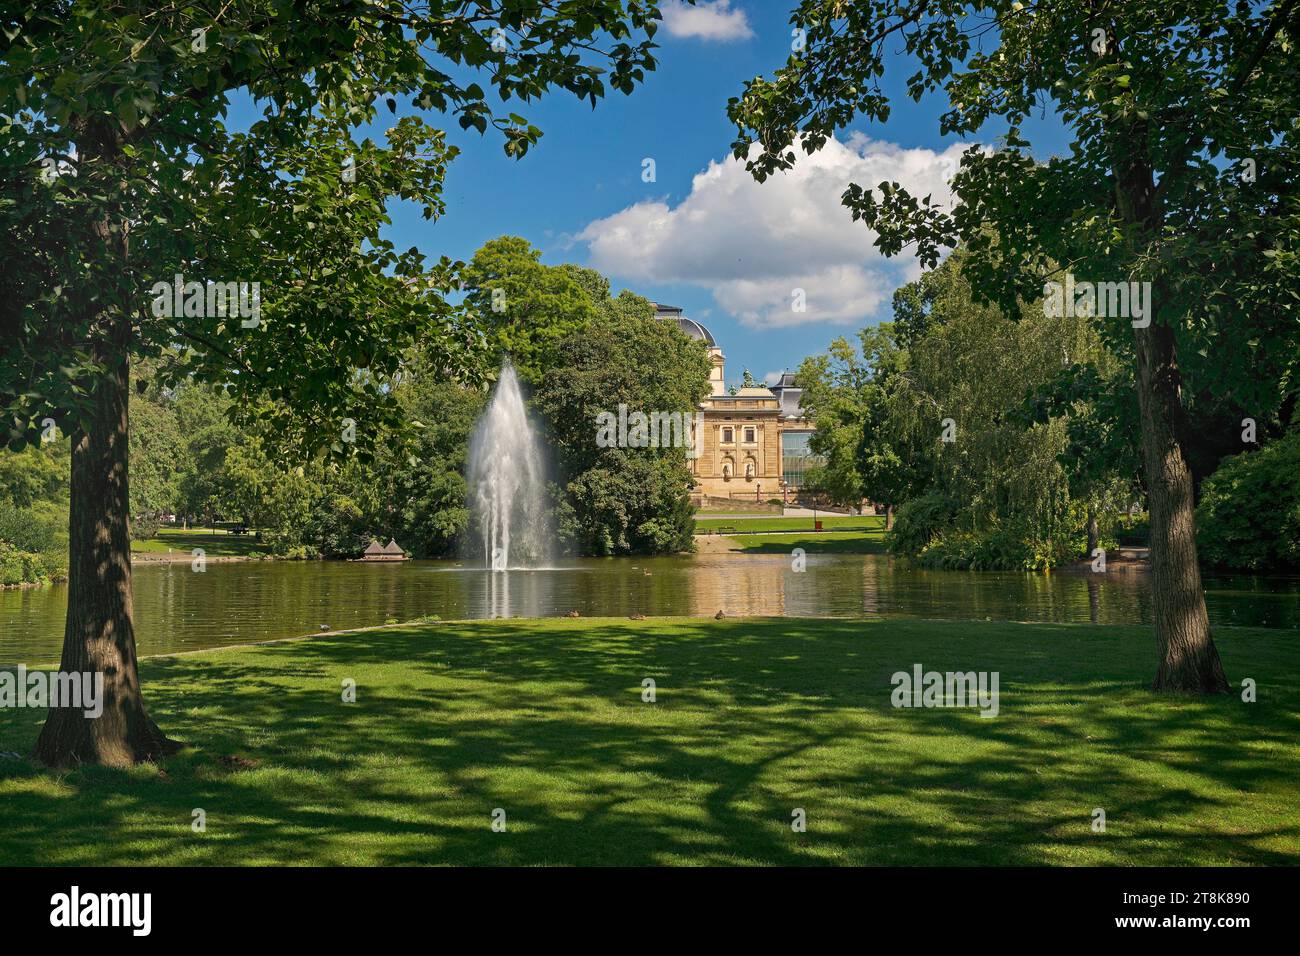 Pond with fountain in the Warmer Damm Landscape Park with Hessian State Theatre, Germany, Hesse, Wiesbaden Stock Photo